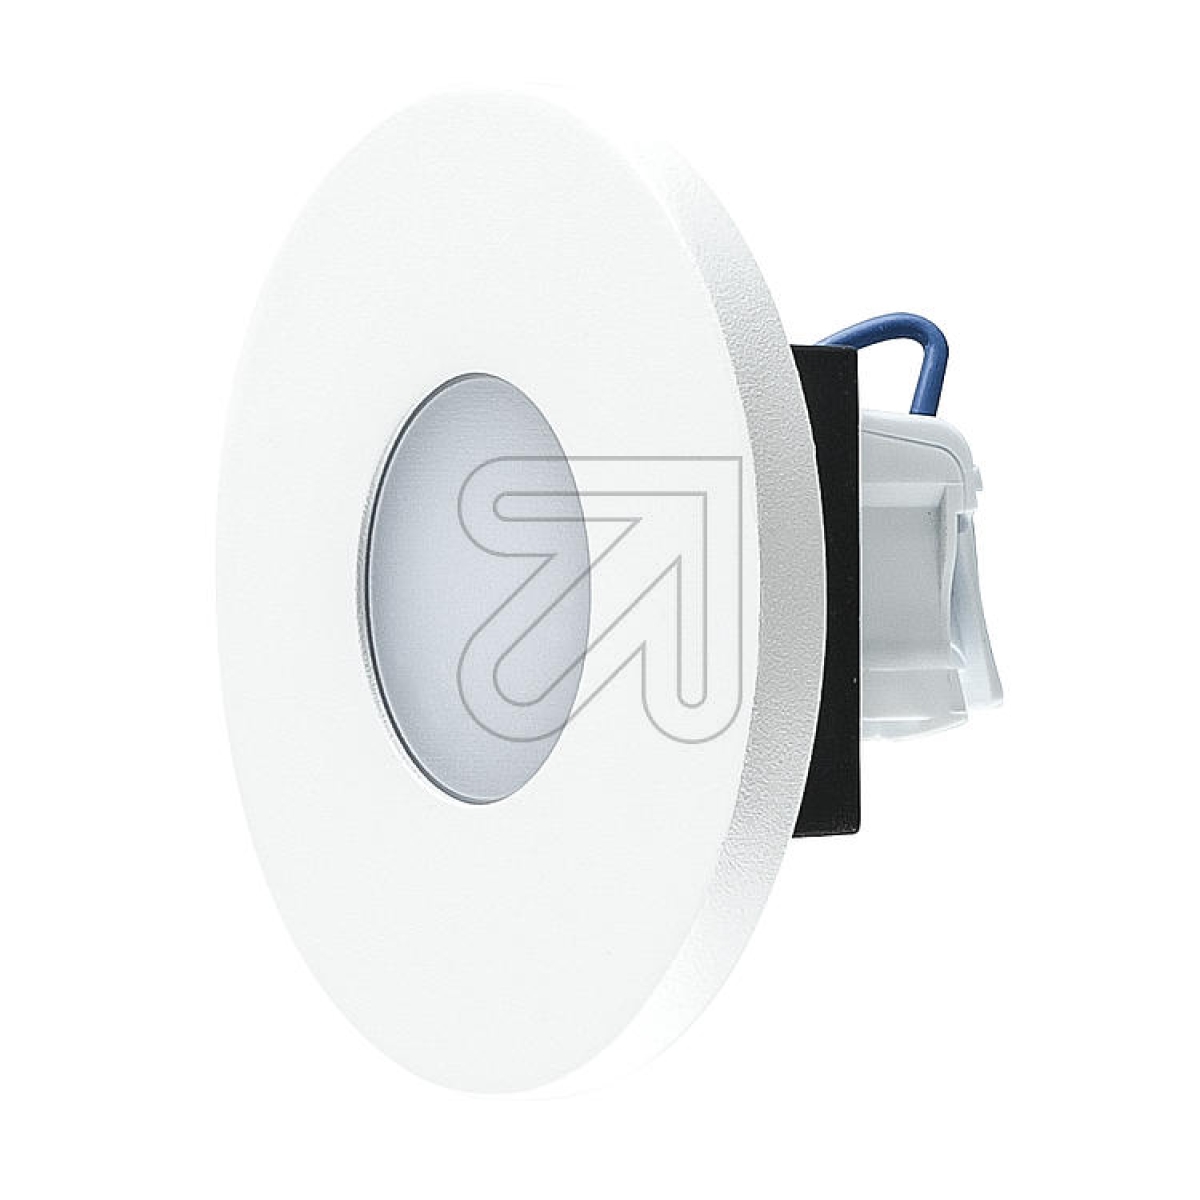 EVNLED recessed wall light IP44, 1.8W 4000K, white 230V, 65lm, stainless steel, LR01840WArticle-No: 650340